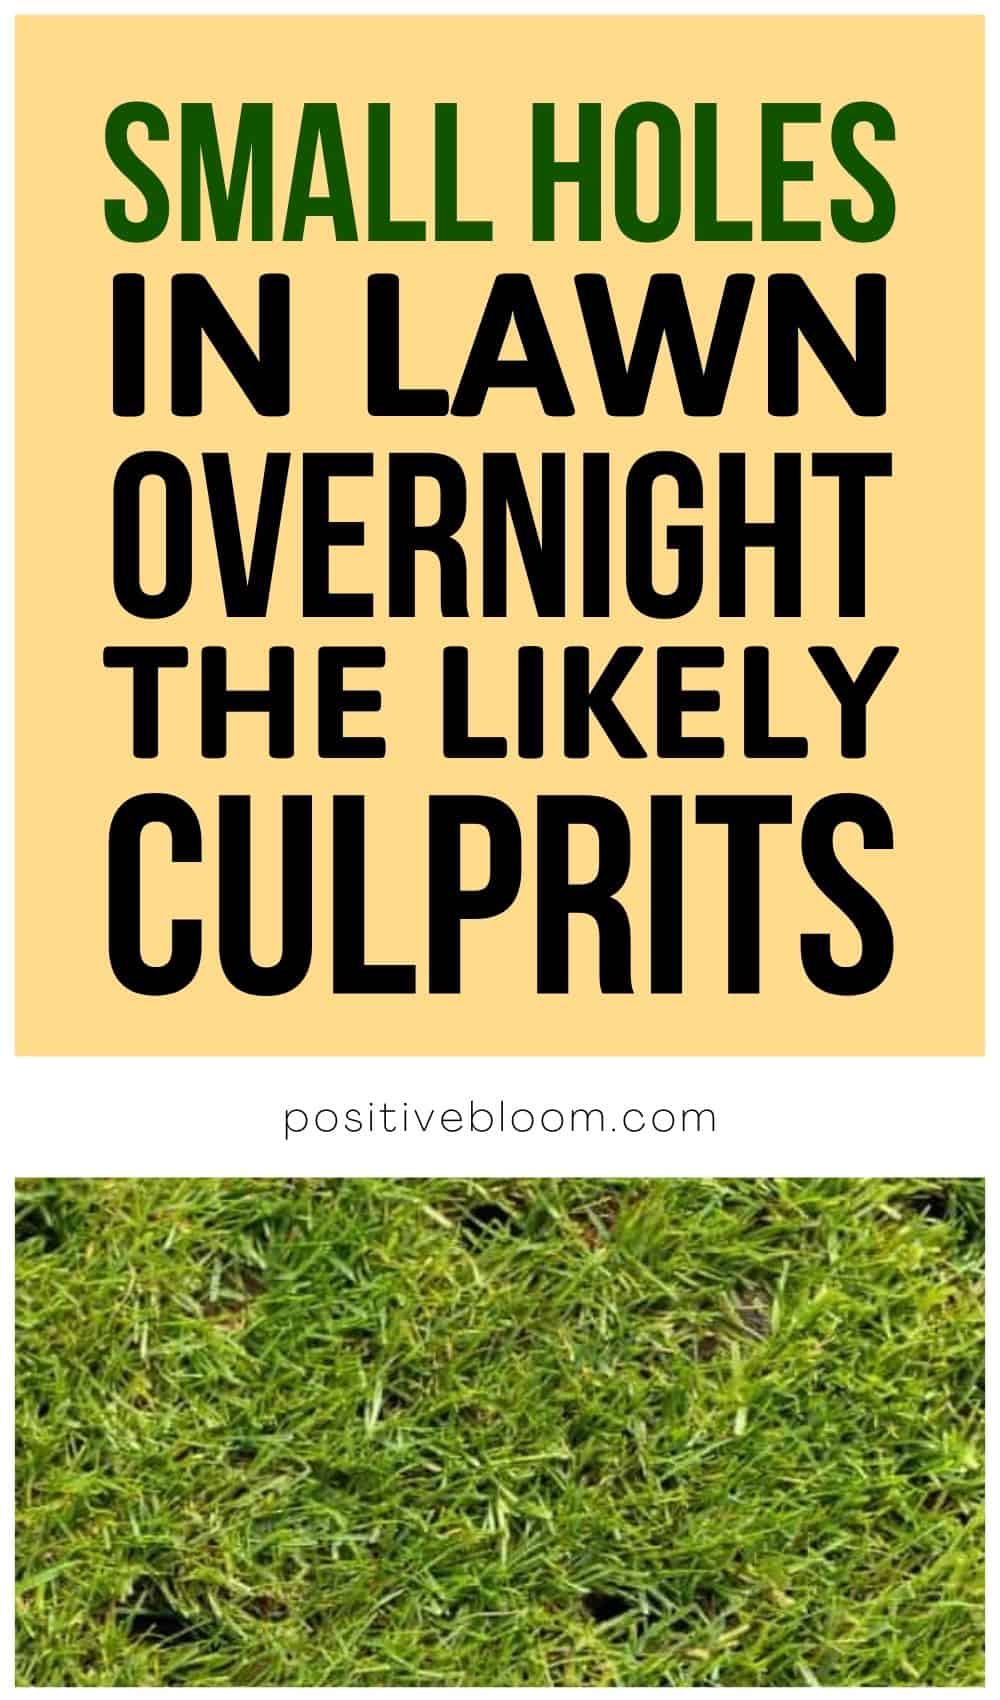 Small Holes In Lawn Overnight – The Likely Culprits